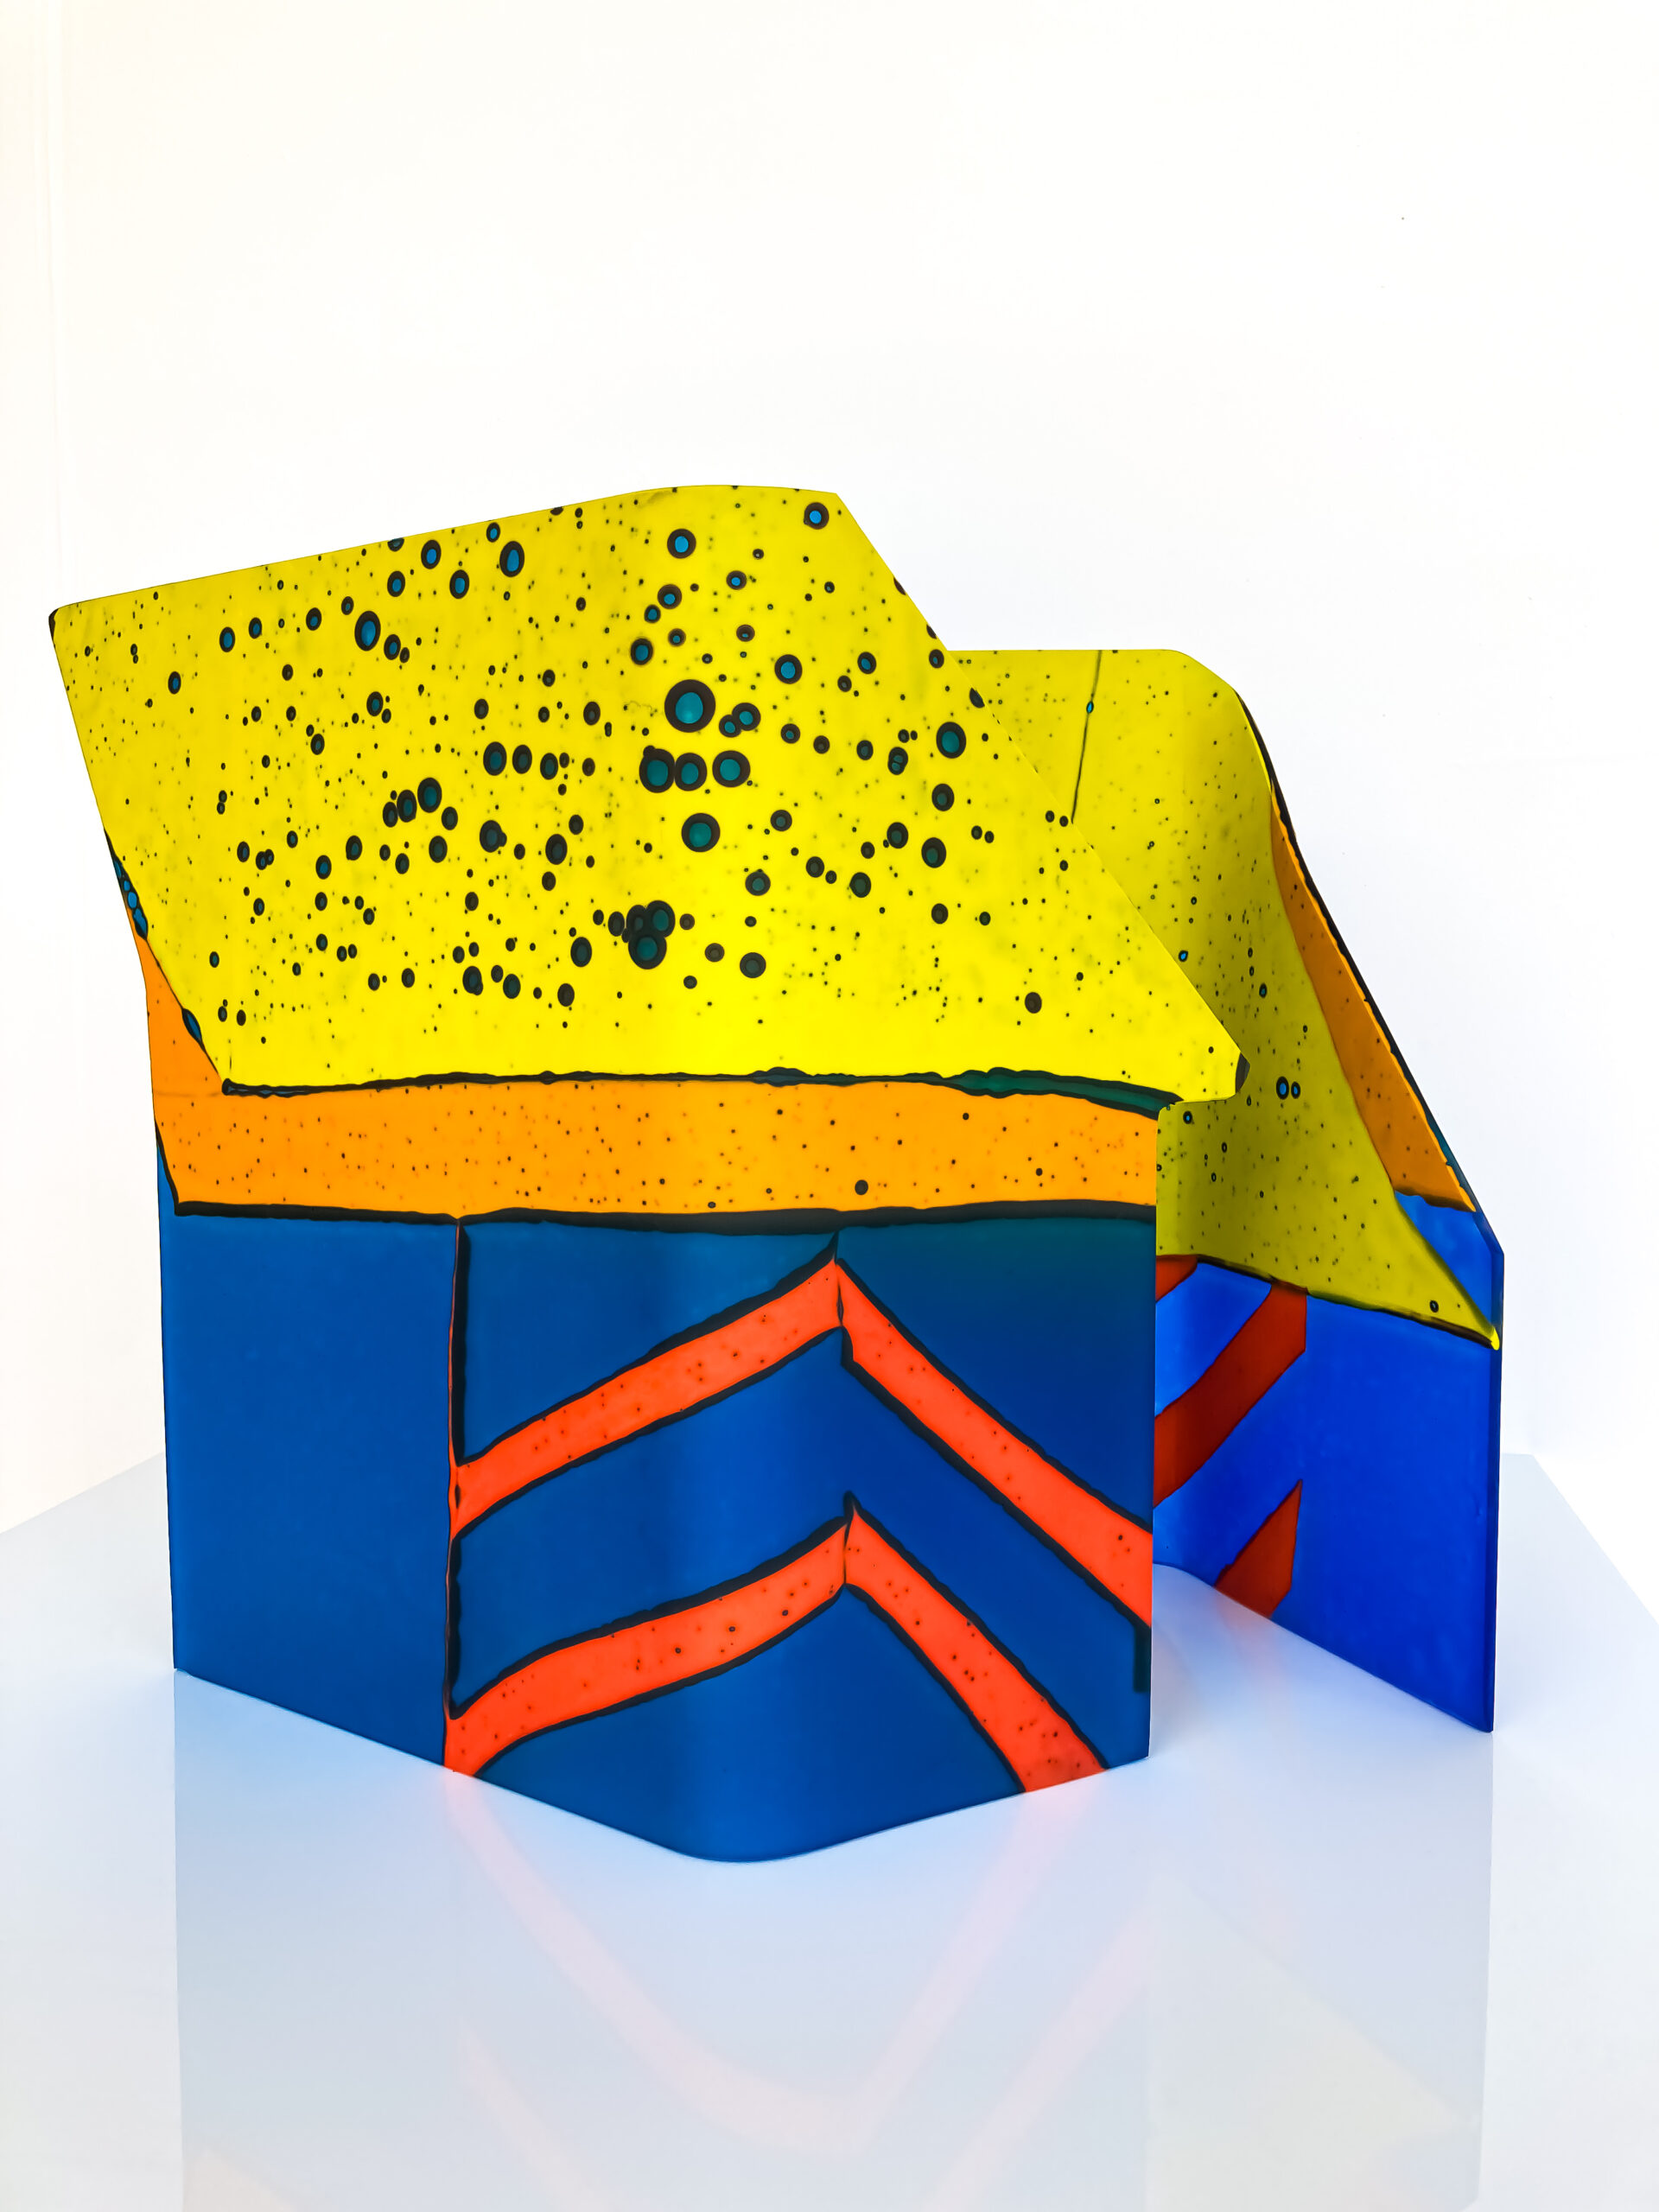 A bold glass sculpture of blue, yellow and orange. It sort of resembles a building